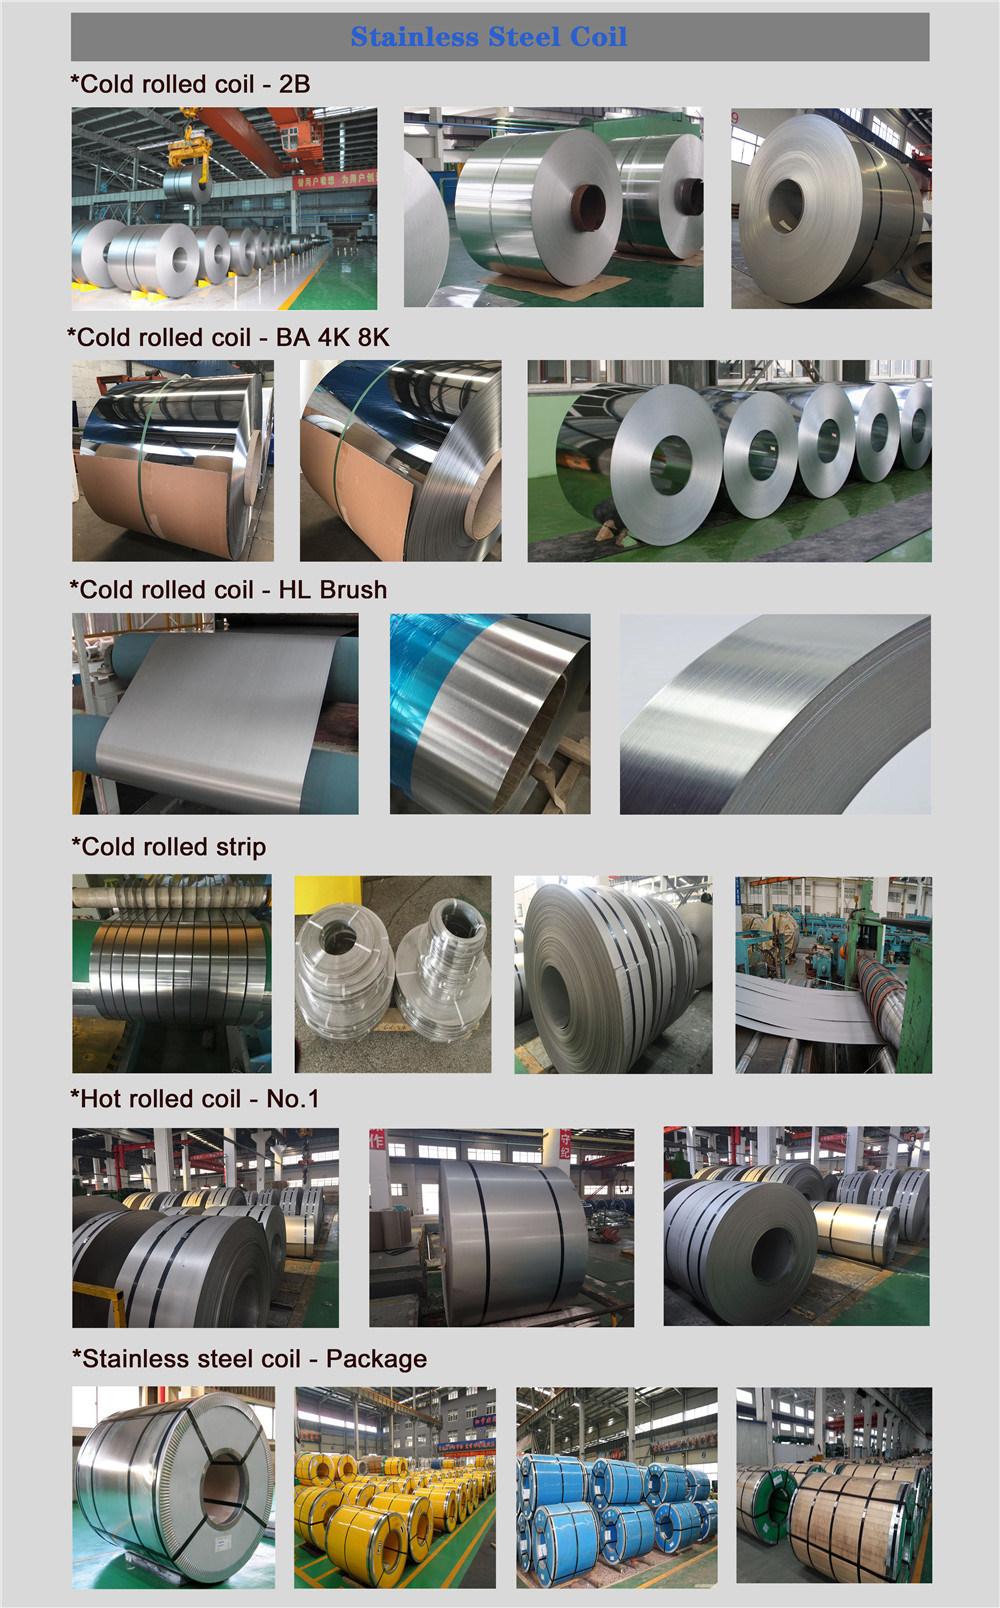 Wuxi Factory Price Tisco/Posco/Bao Raw Materials 201 304 304L 310 316 316L 904L Stainless Steel Coil with Fast Delivery and Integrity Management